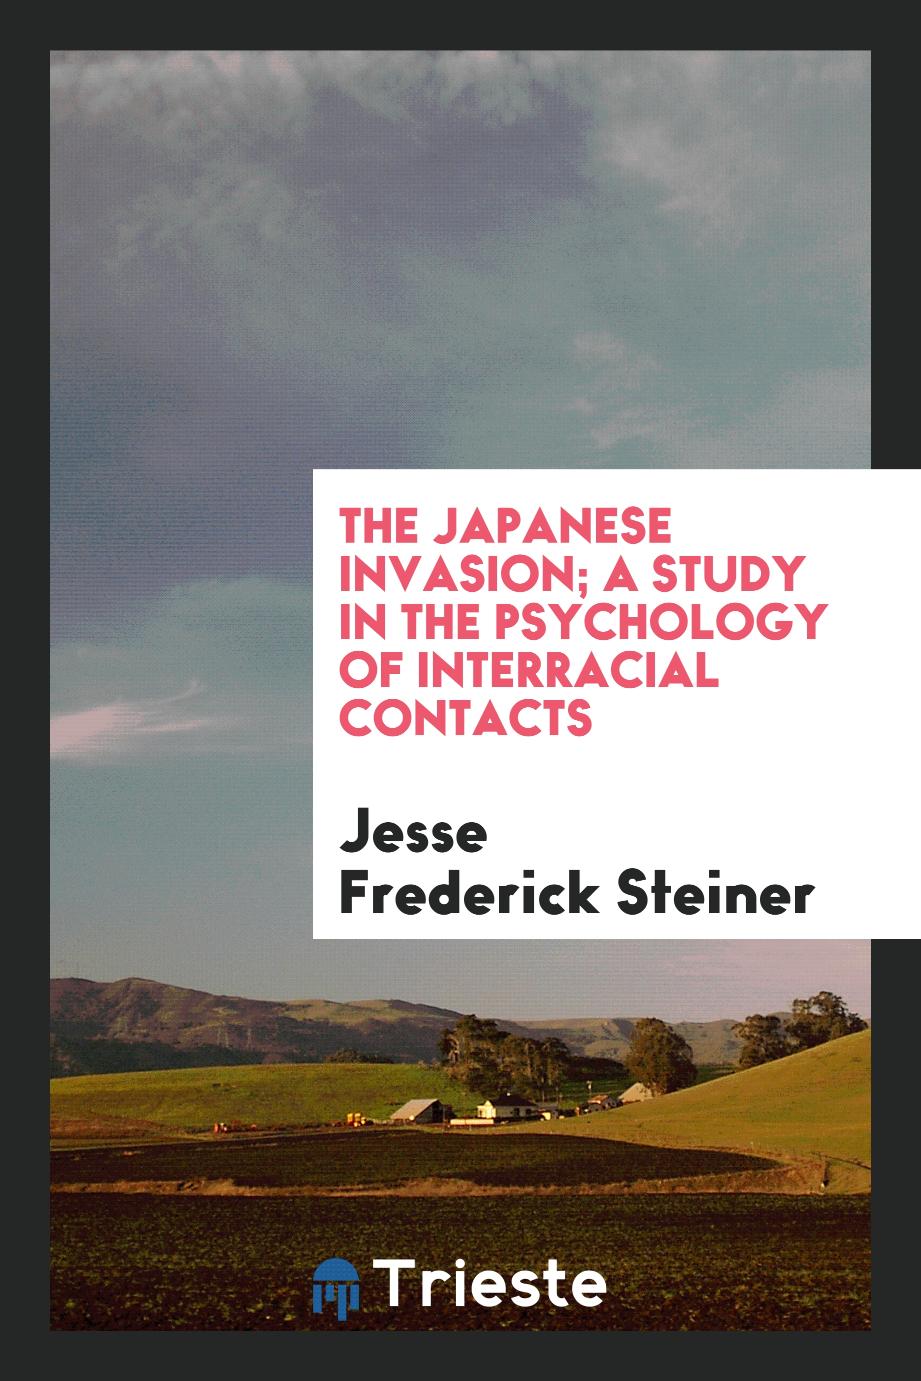 The Japanese invasion; a study in the psychology of interracial contacts